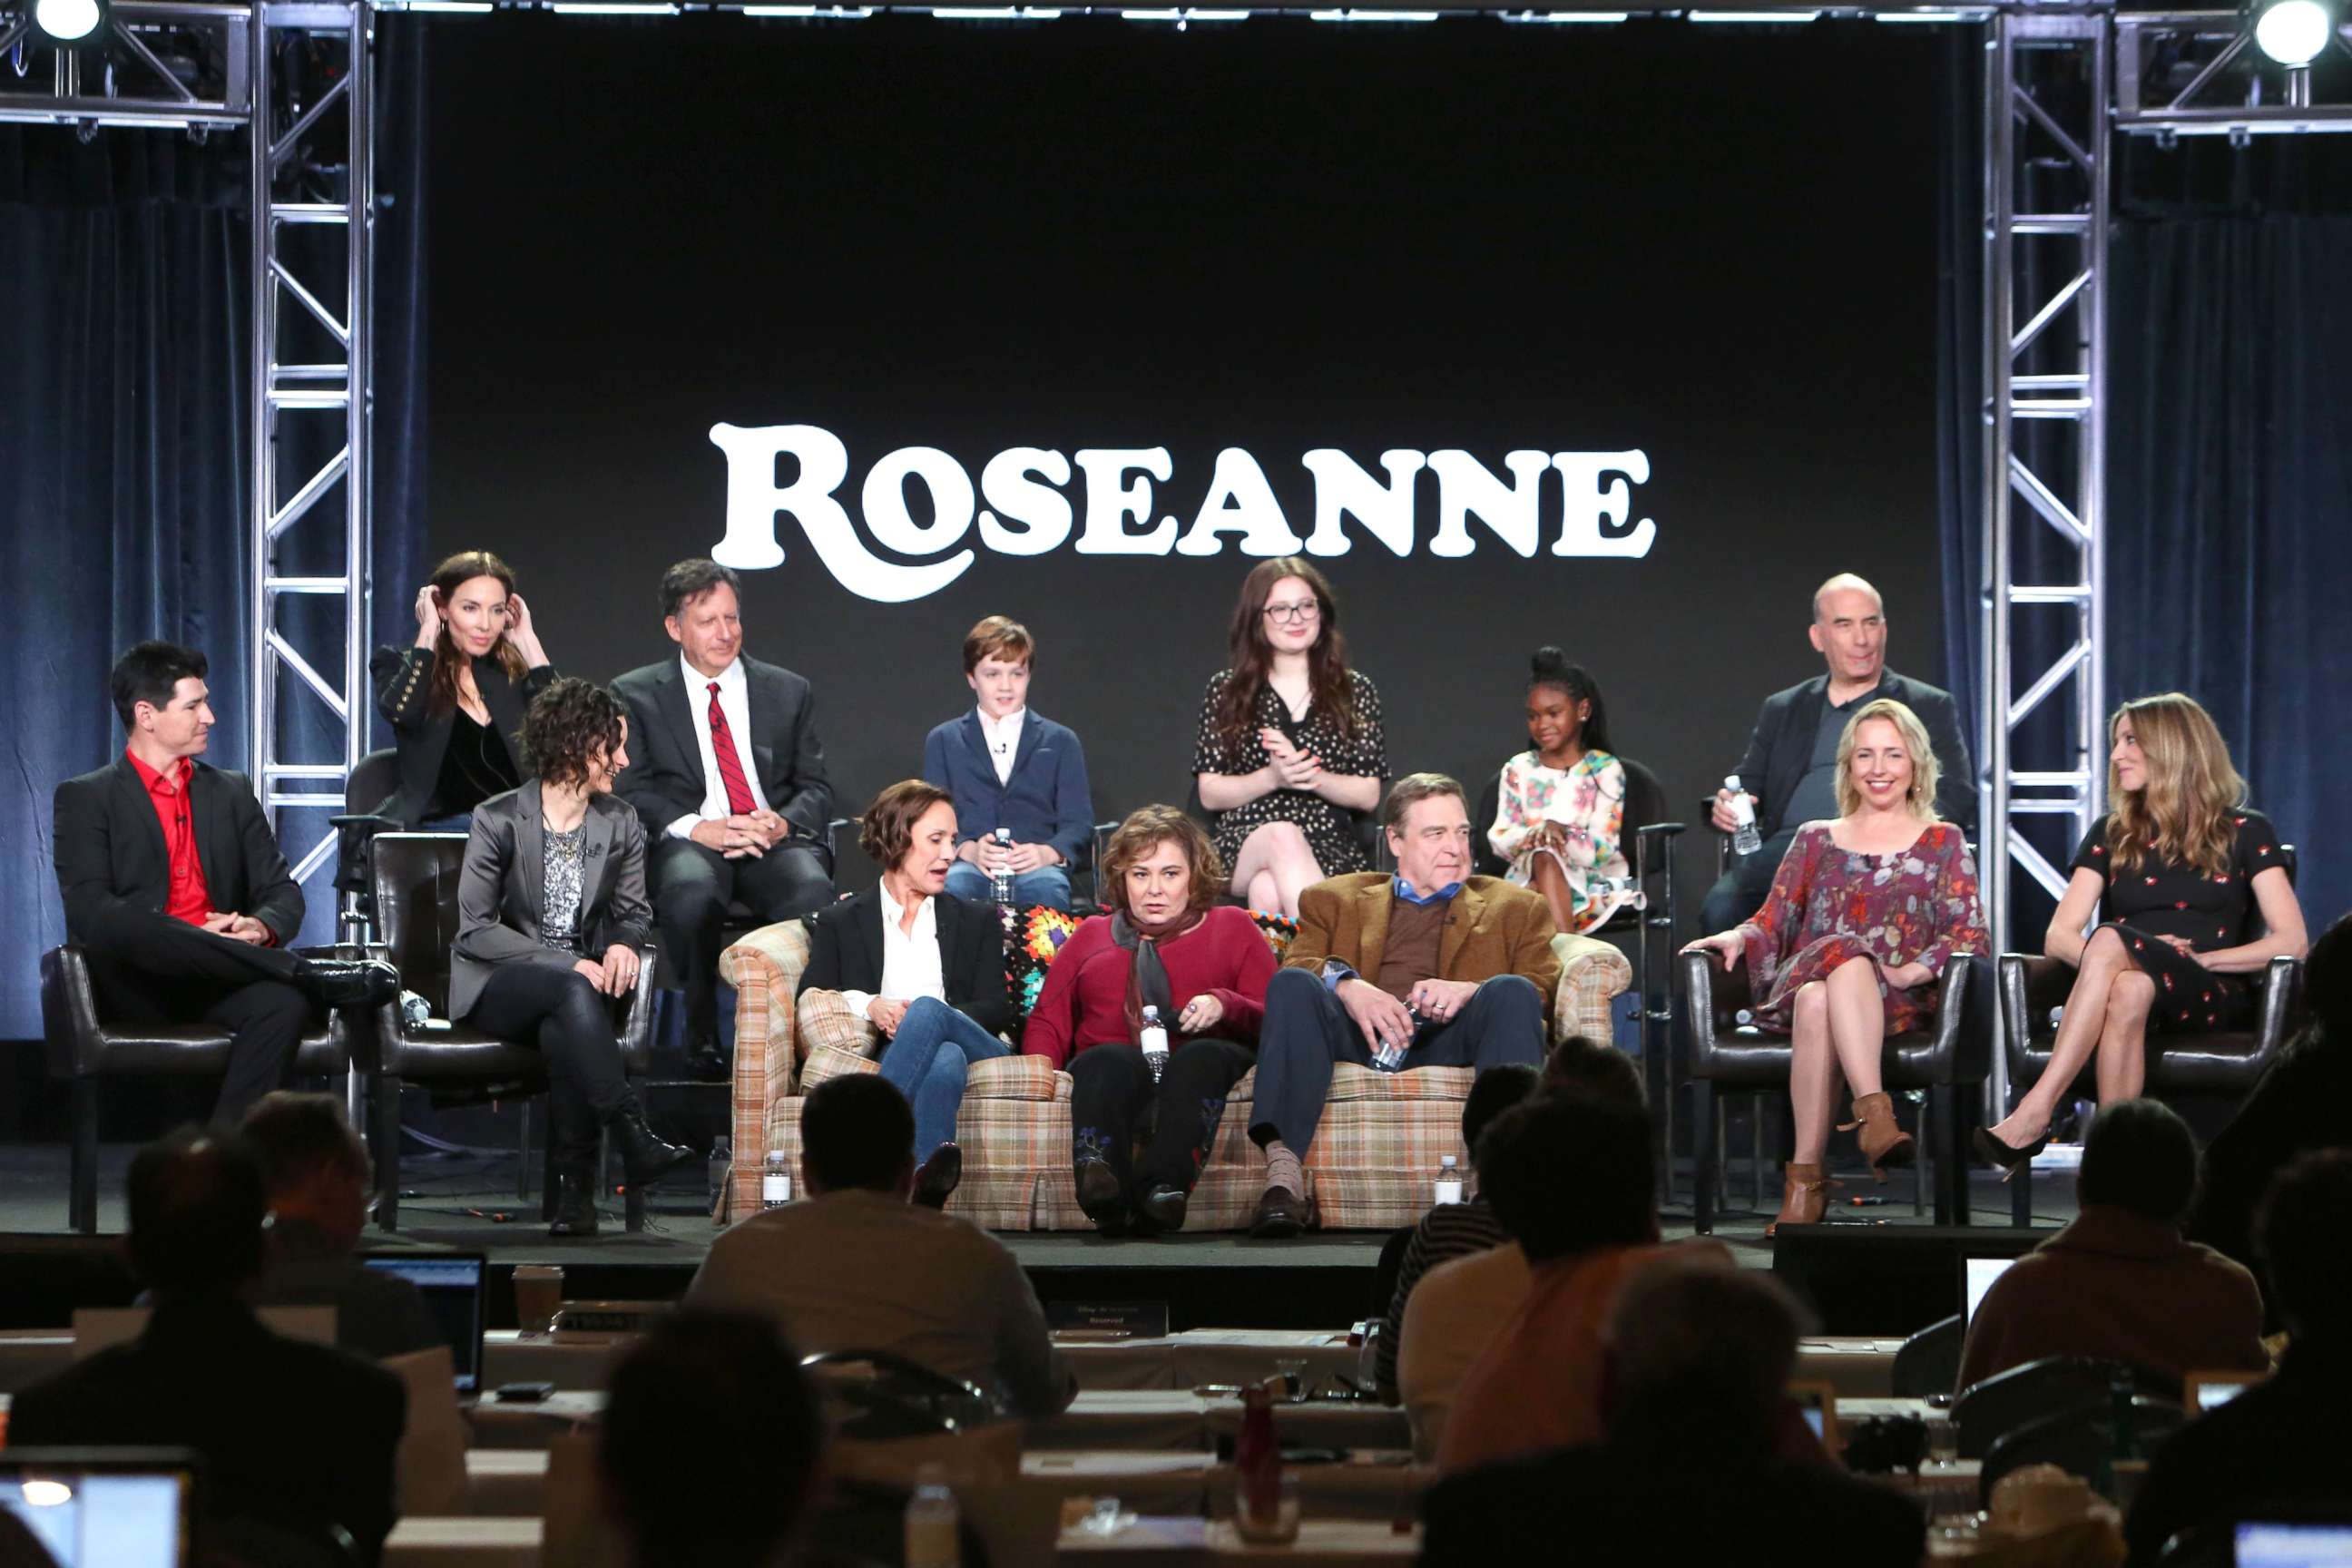 PHOTO: The cast from ABC "Roseanne," TV show on the TCA Winter Press Tour, Jan. 8, 2018, in Los Angeles.